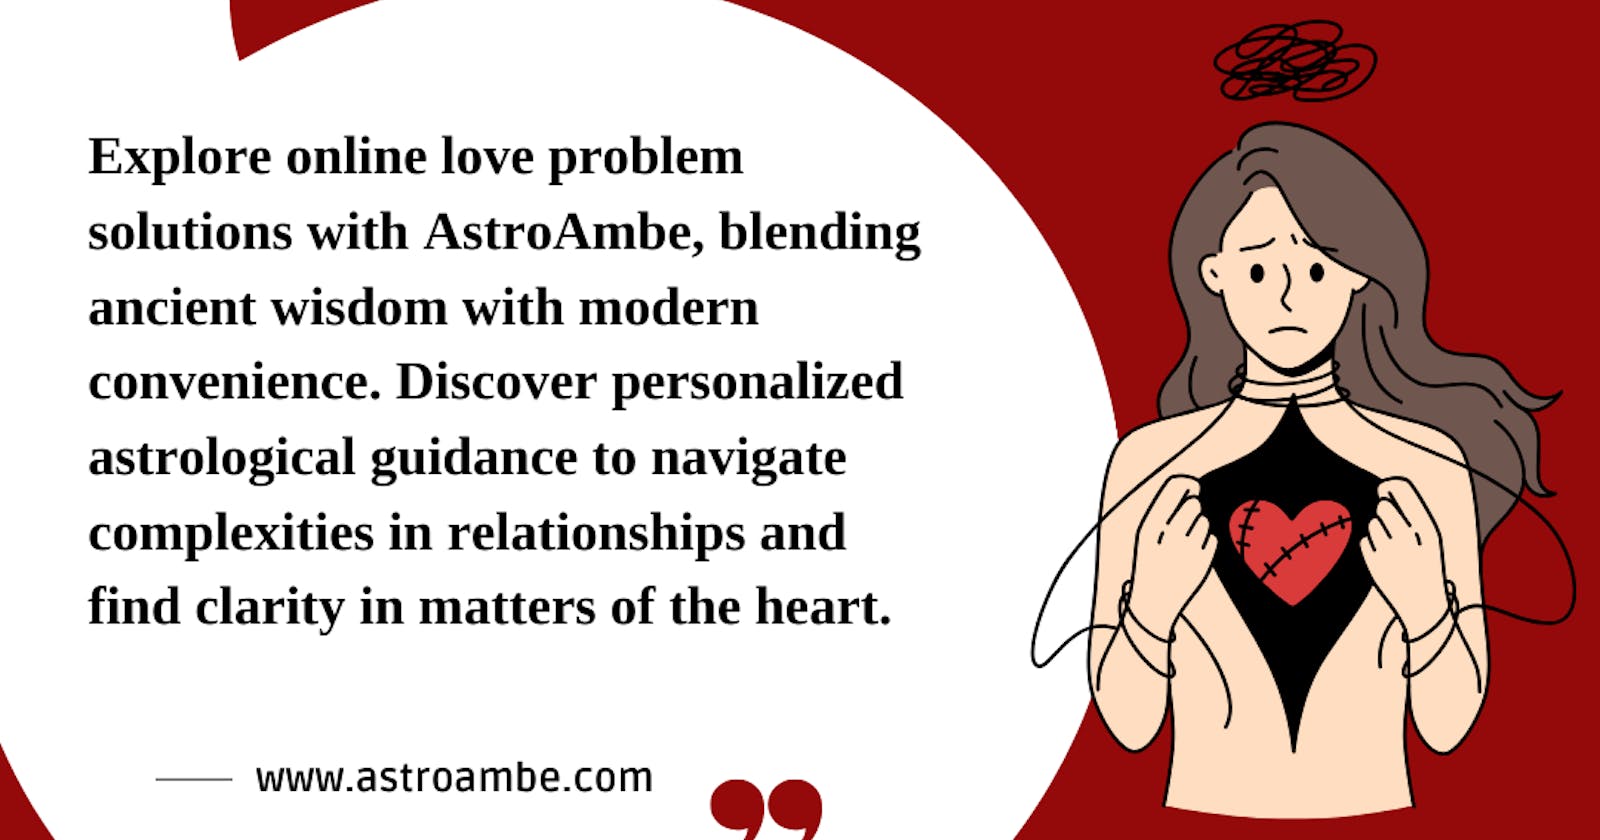 Exploring Online Love Problem Solutions with Astrology: Insights from AstroAmbe